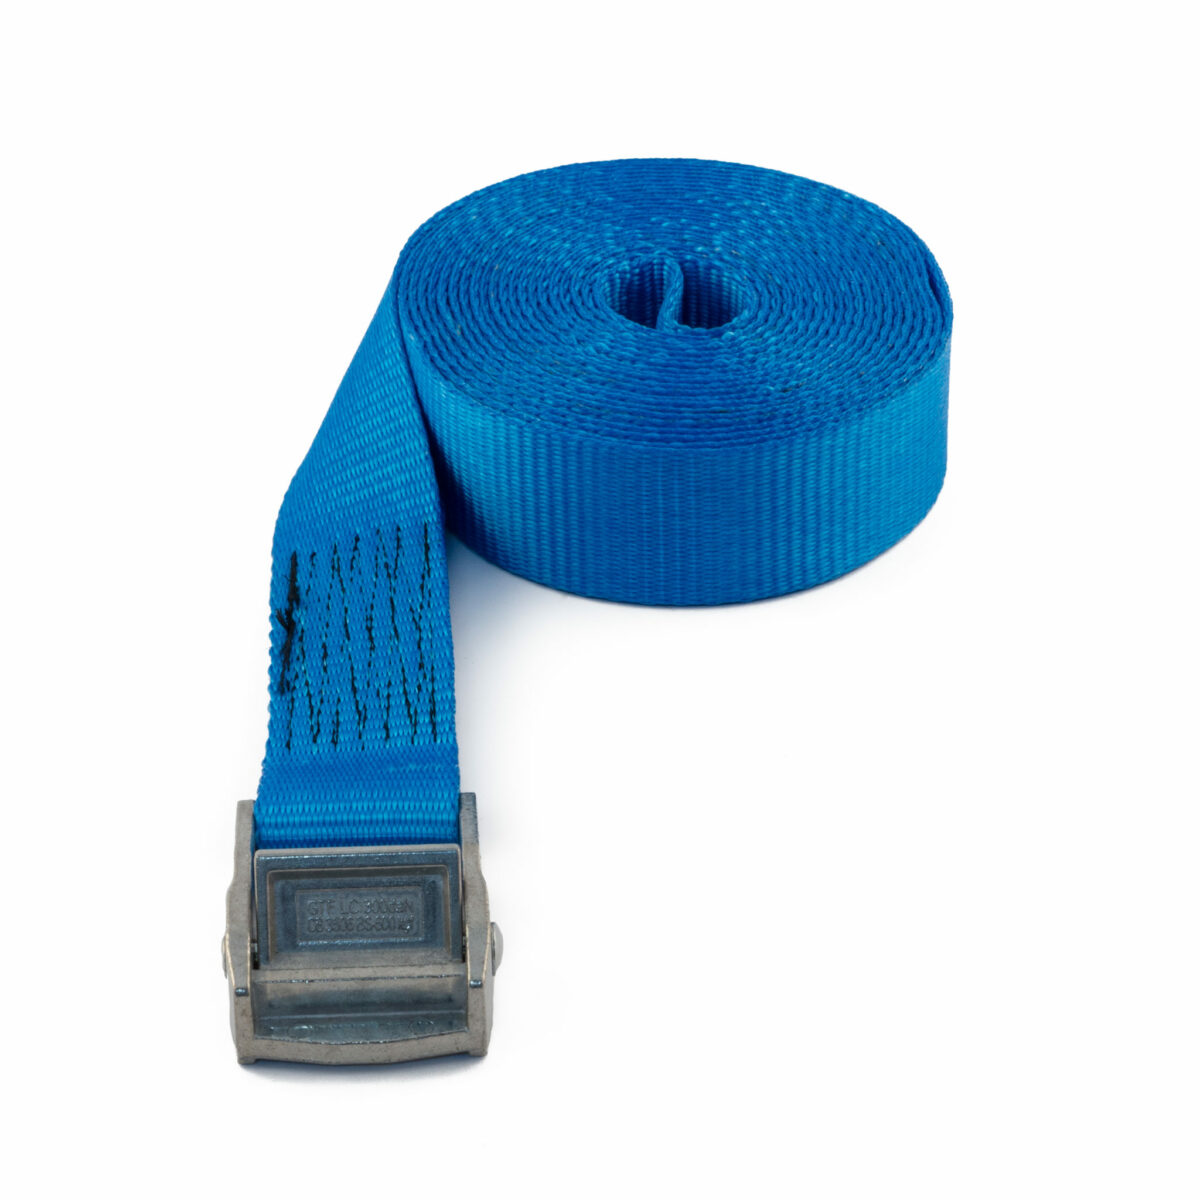 35mm Endless (1 Part) Cam Buckle Straps rated to 1200Kg - GTF